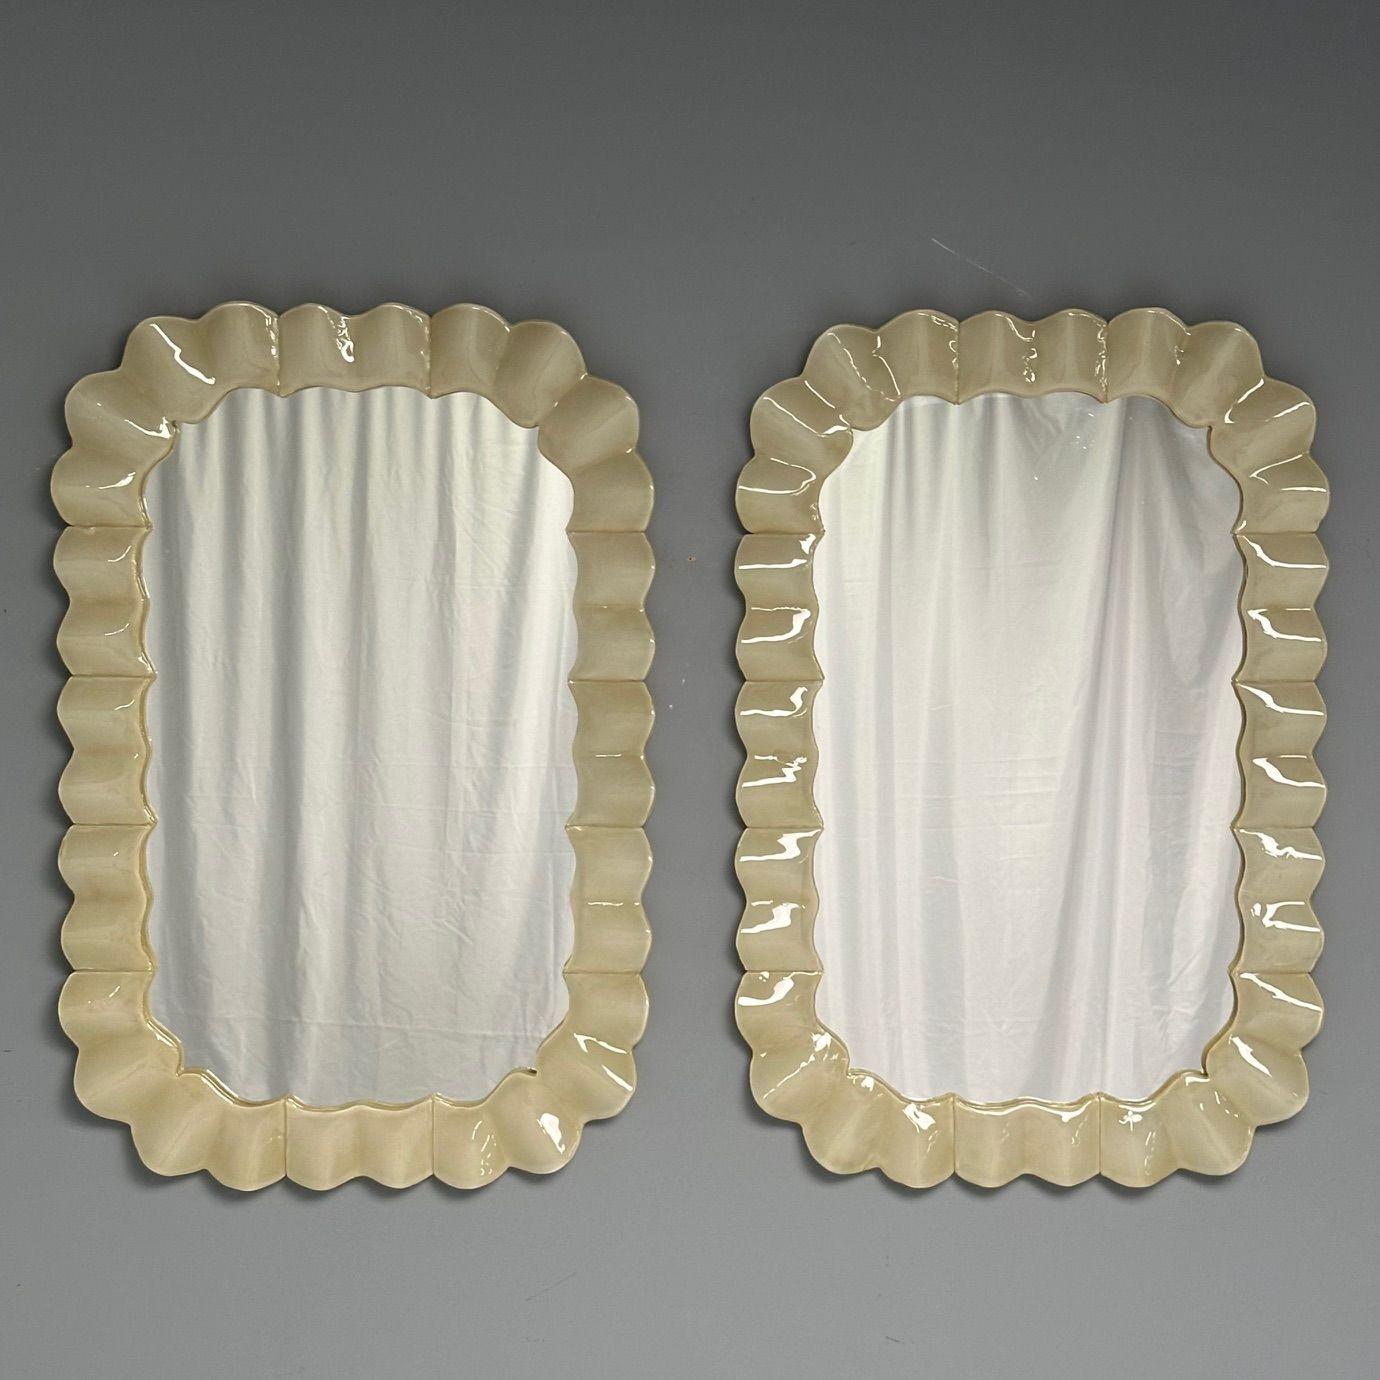 Modern Contemporary, Ruffle Wall Mirrors, White Murano Glass, Brass, Italy, 2023 For Sale